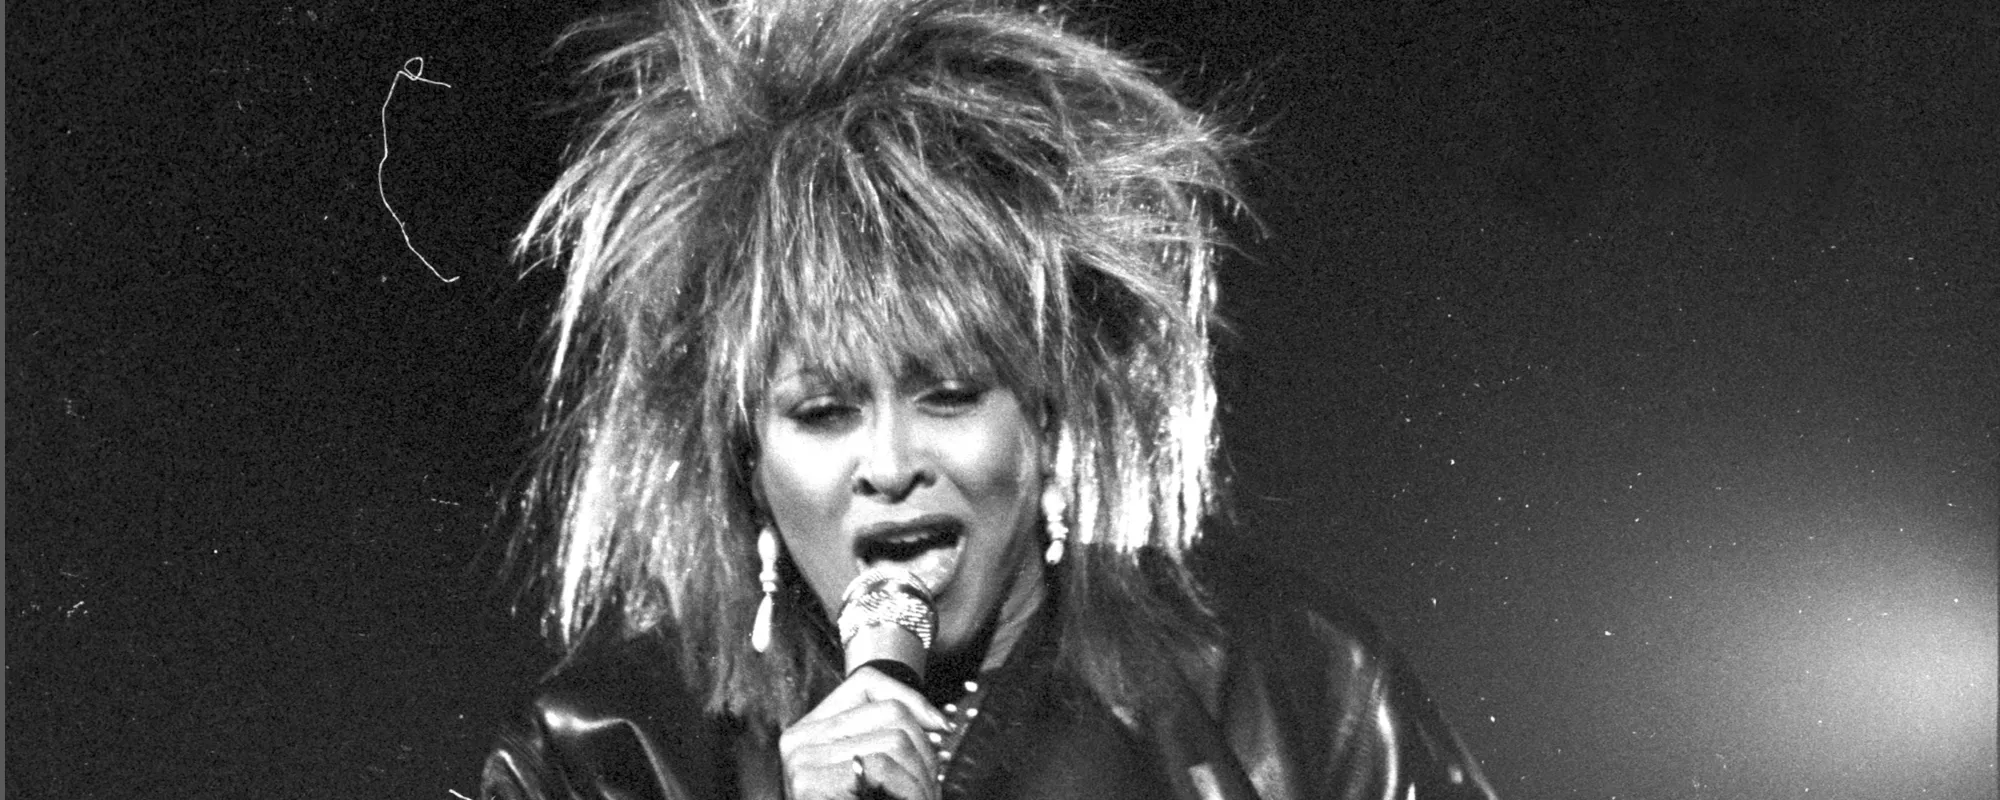 Meaning Behind Tina Turner’s Sexy Hit “Private Dancer”